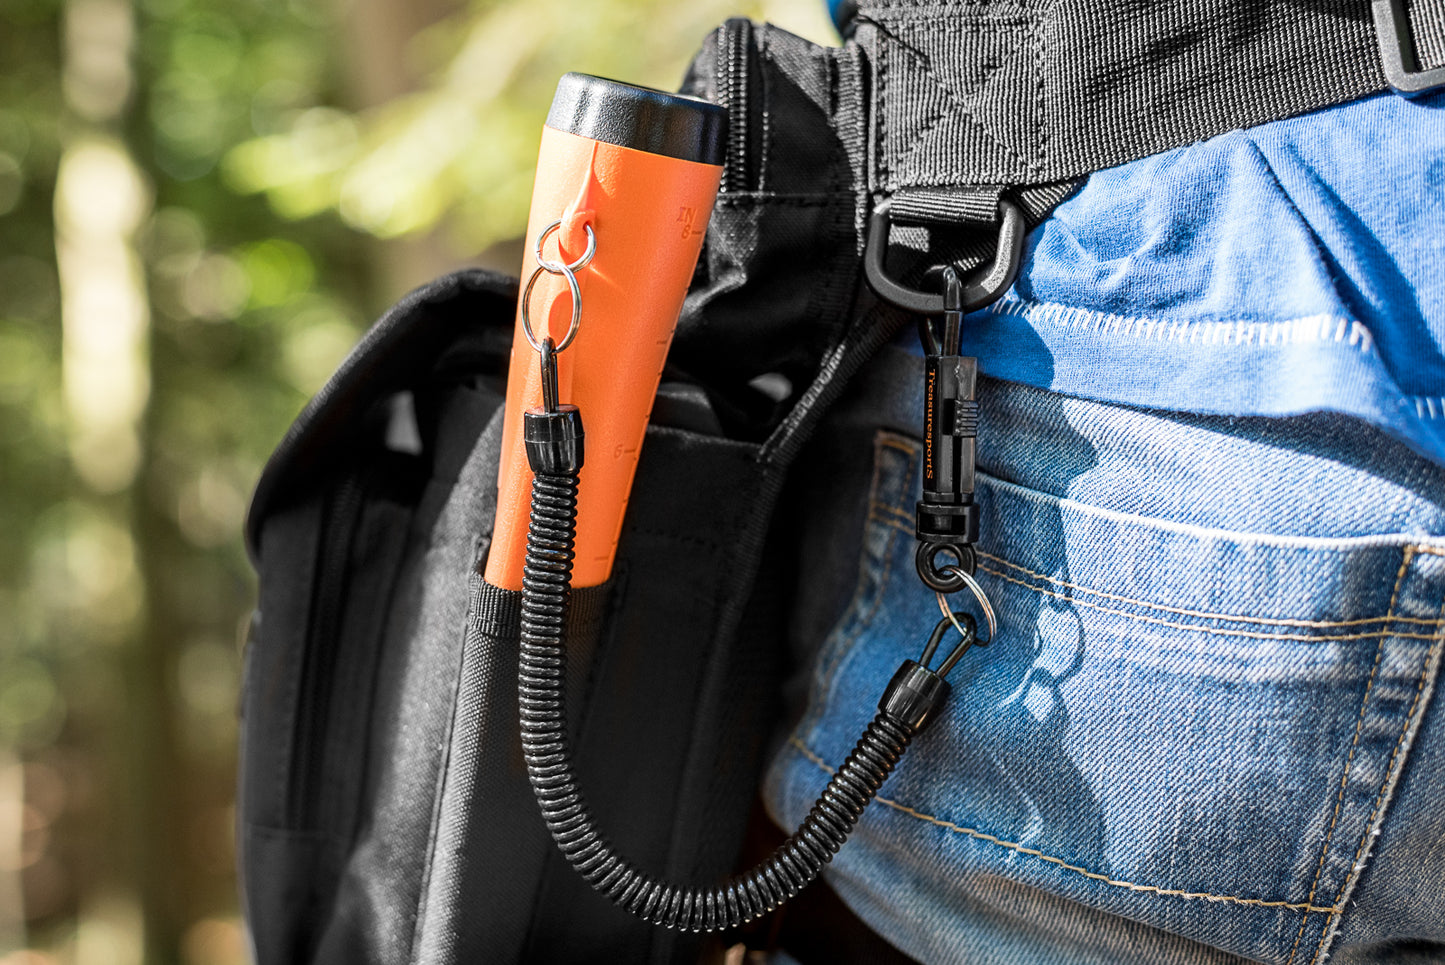 Drop pouch for finds with pinpointer holster